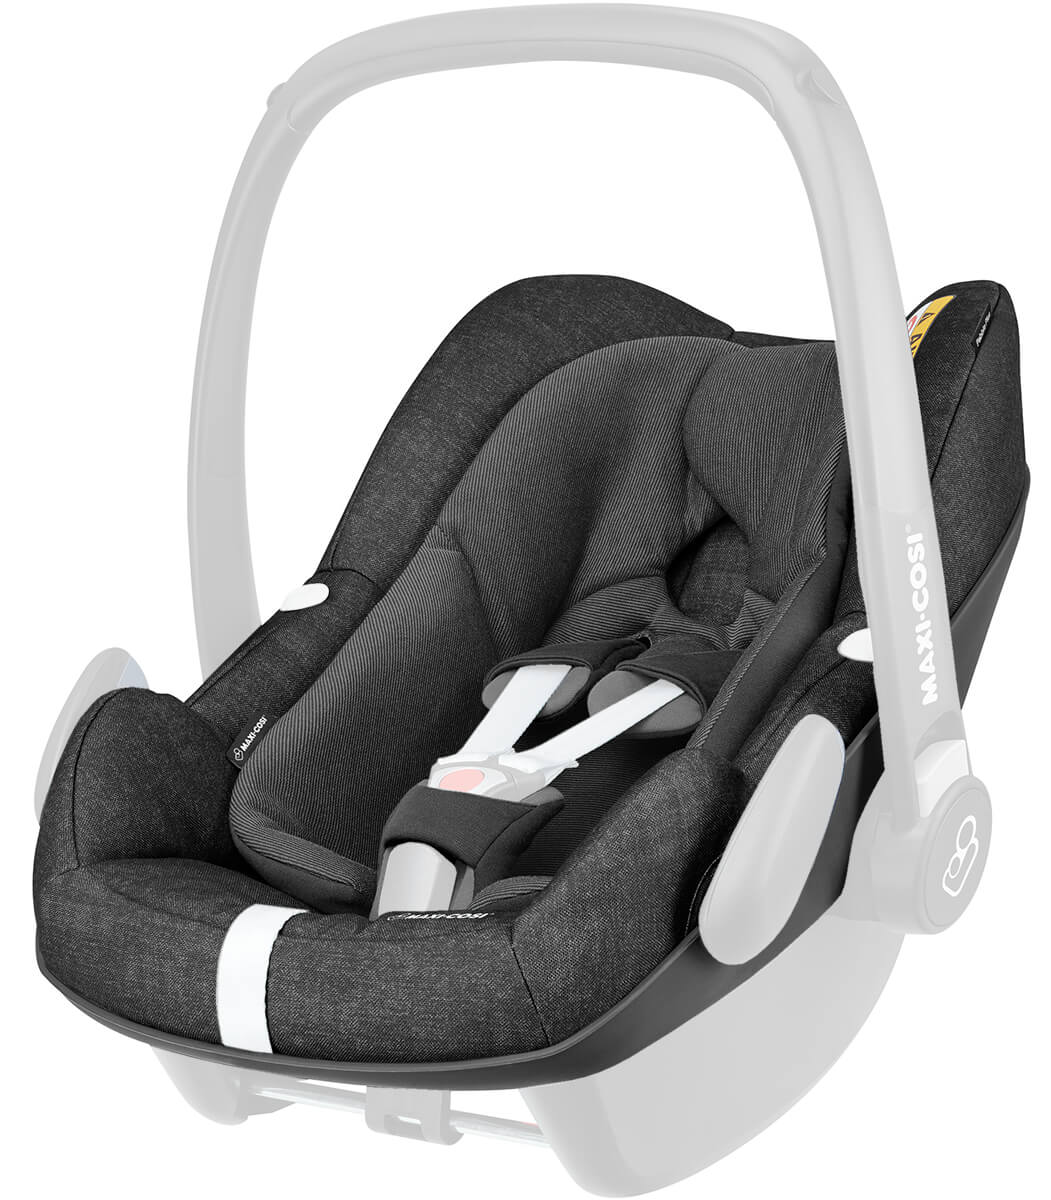 Maxi Cosi Pebble Pro Car Seat for 0 to 12 months | Alfa Kids